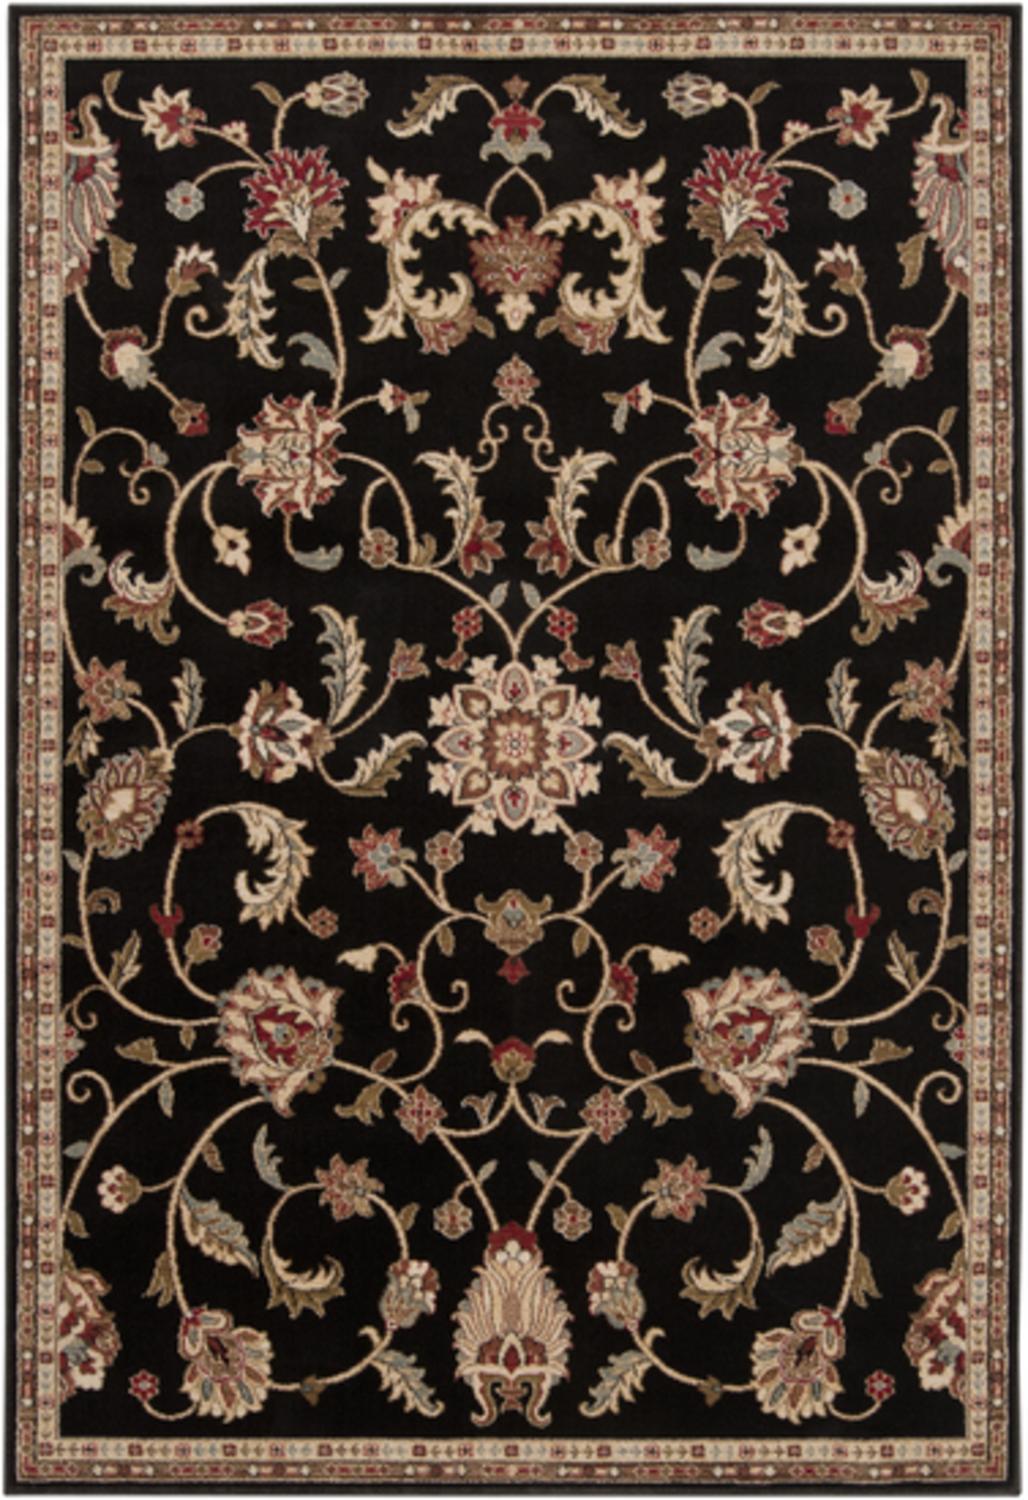 Diva At Home 5.25' x 7.5' Majestic Garden Black and Tan Shed-Free Rectangular Area Throw Rug